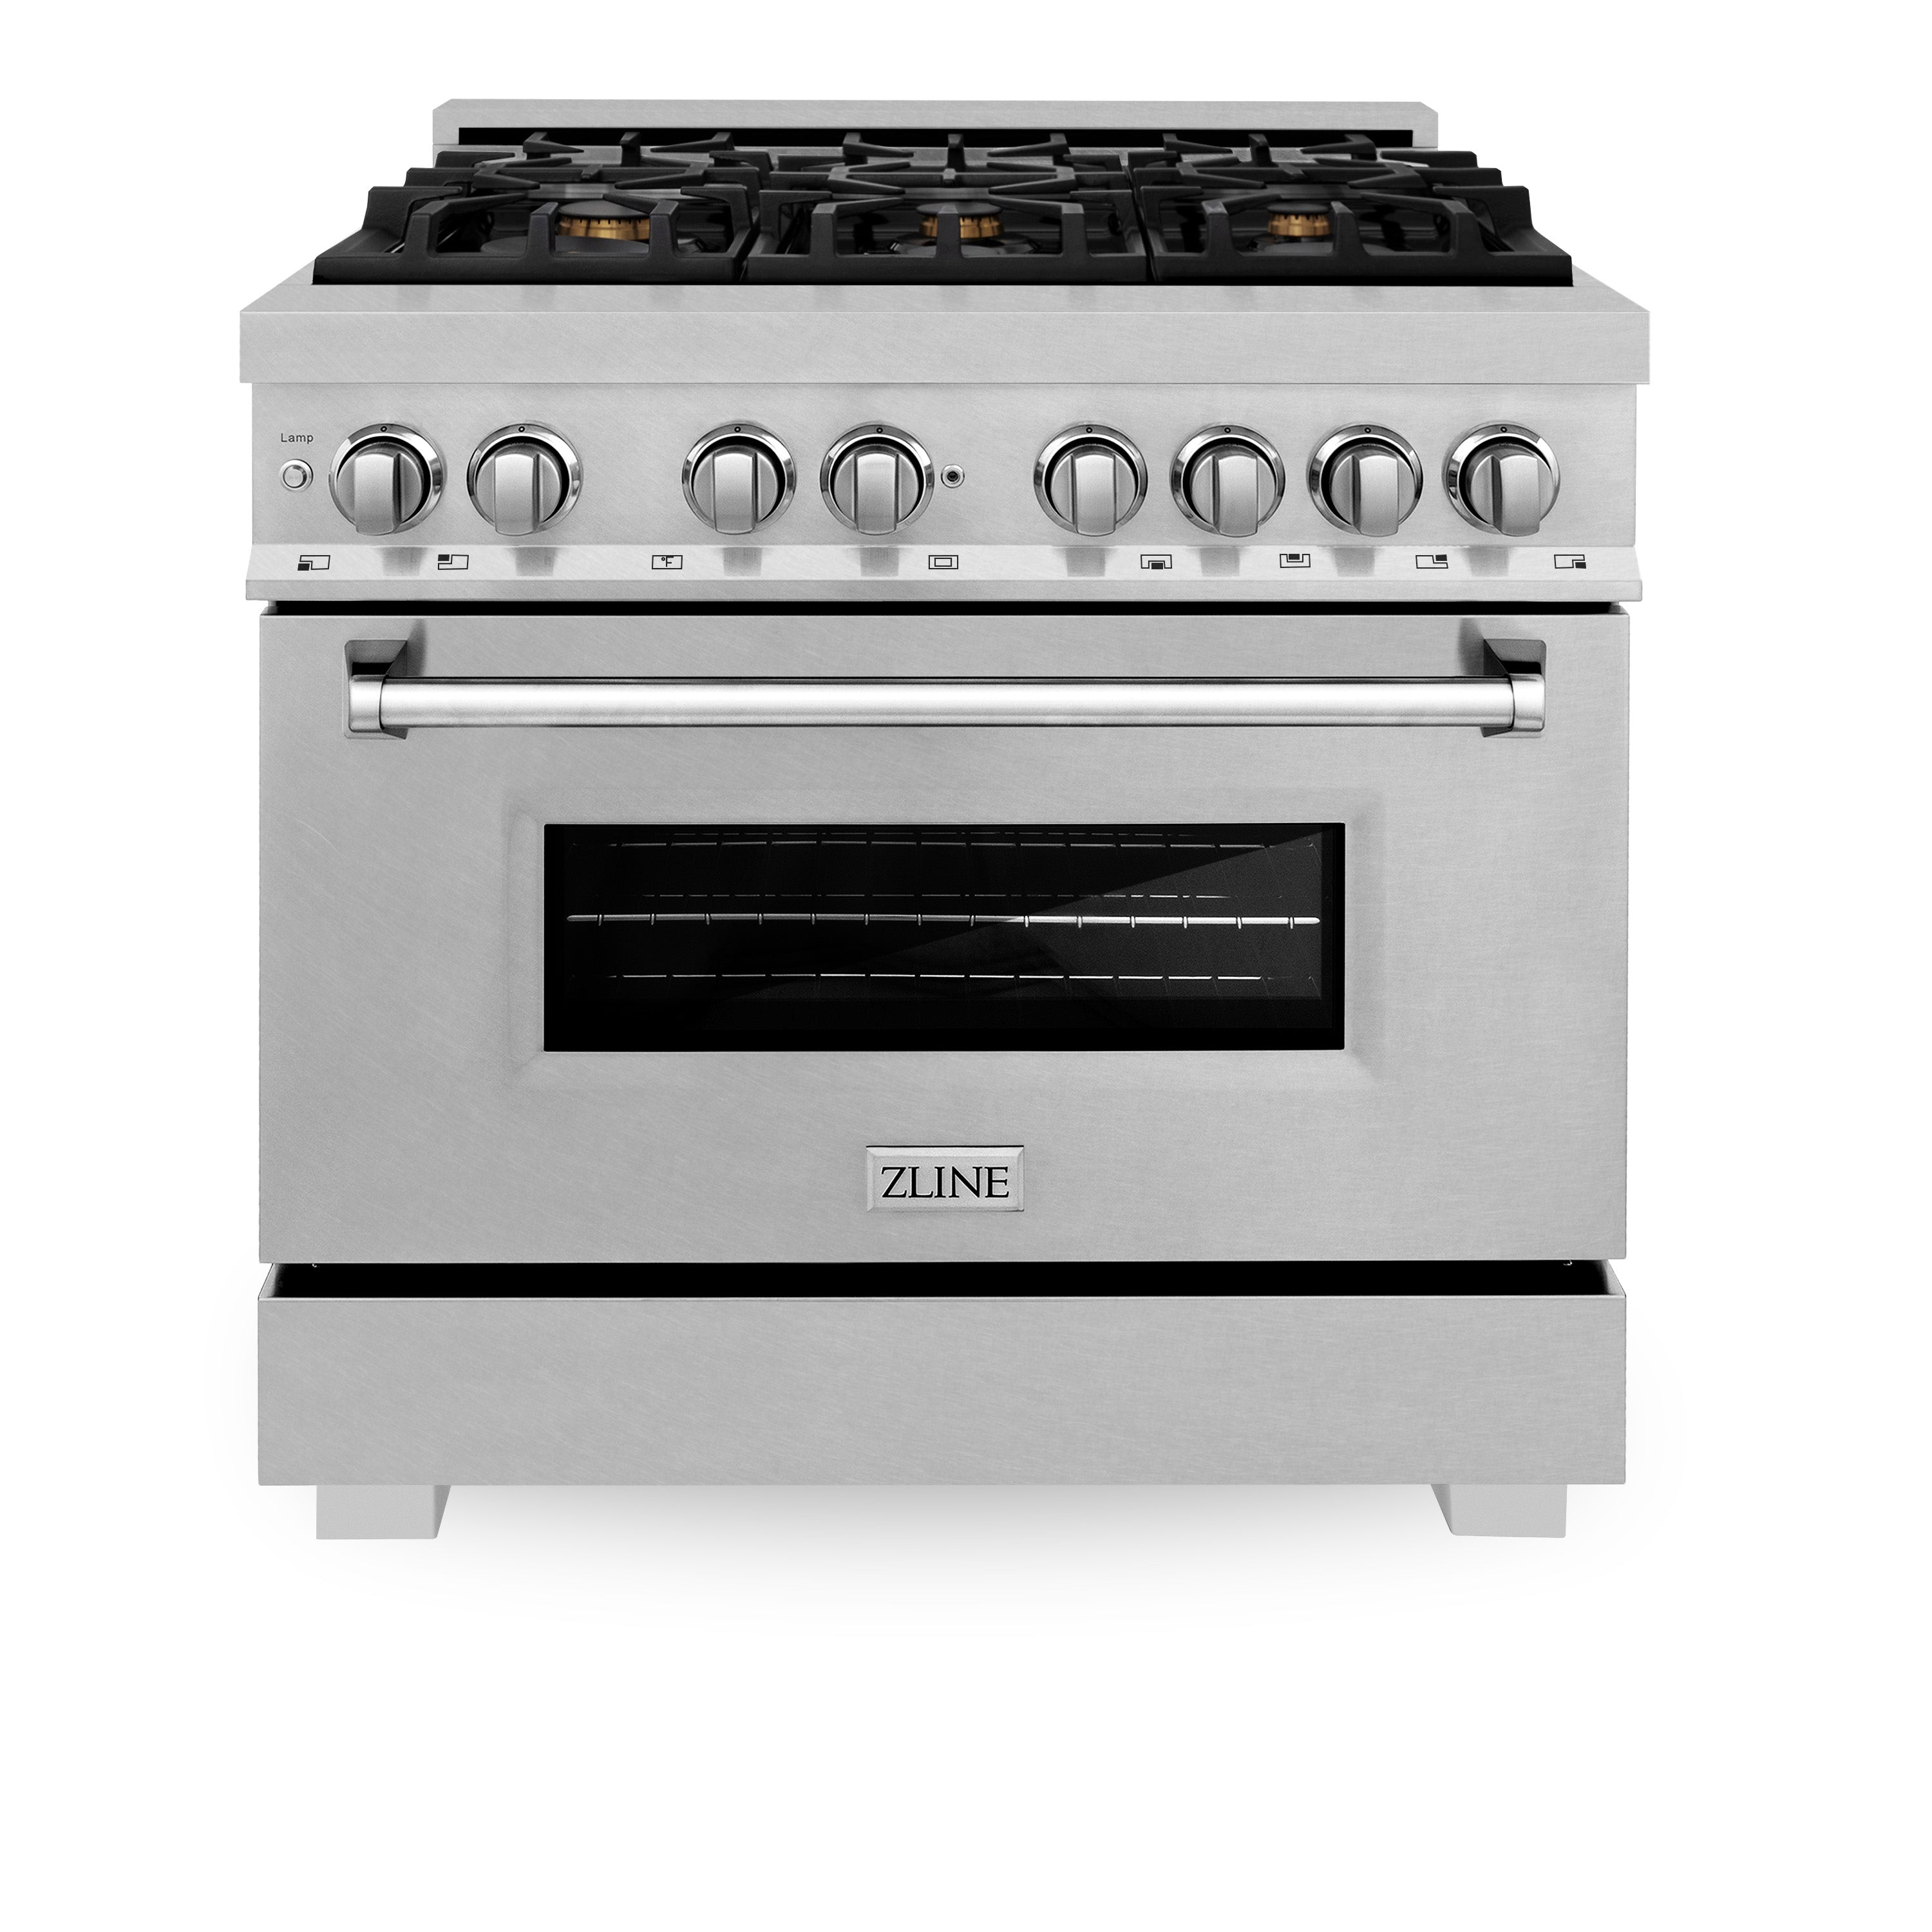 ZLINE 36" 4.6 cu. ft. Dual Fuel Range with Gas Stove and Electric Oven in Fingerprint Resistant Stainless Steel and Brass Burners (RAS-SN-BR-36)